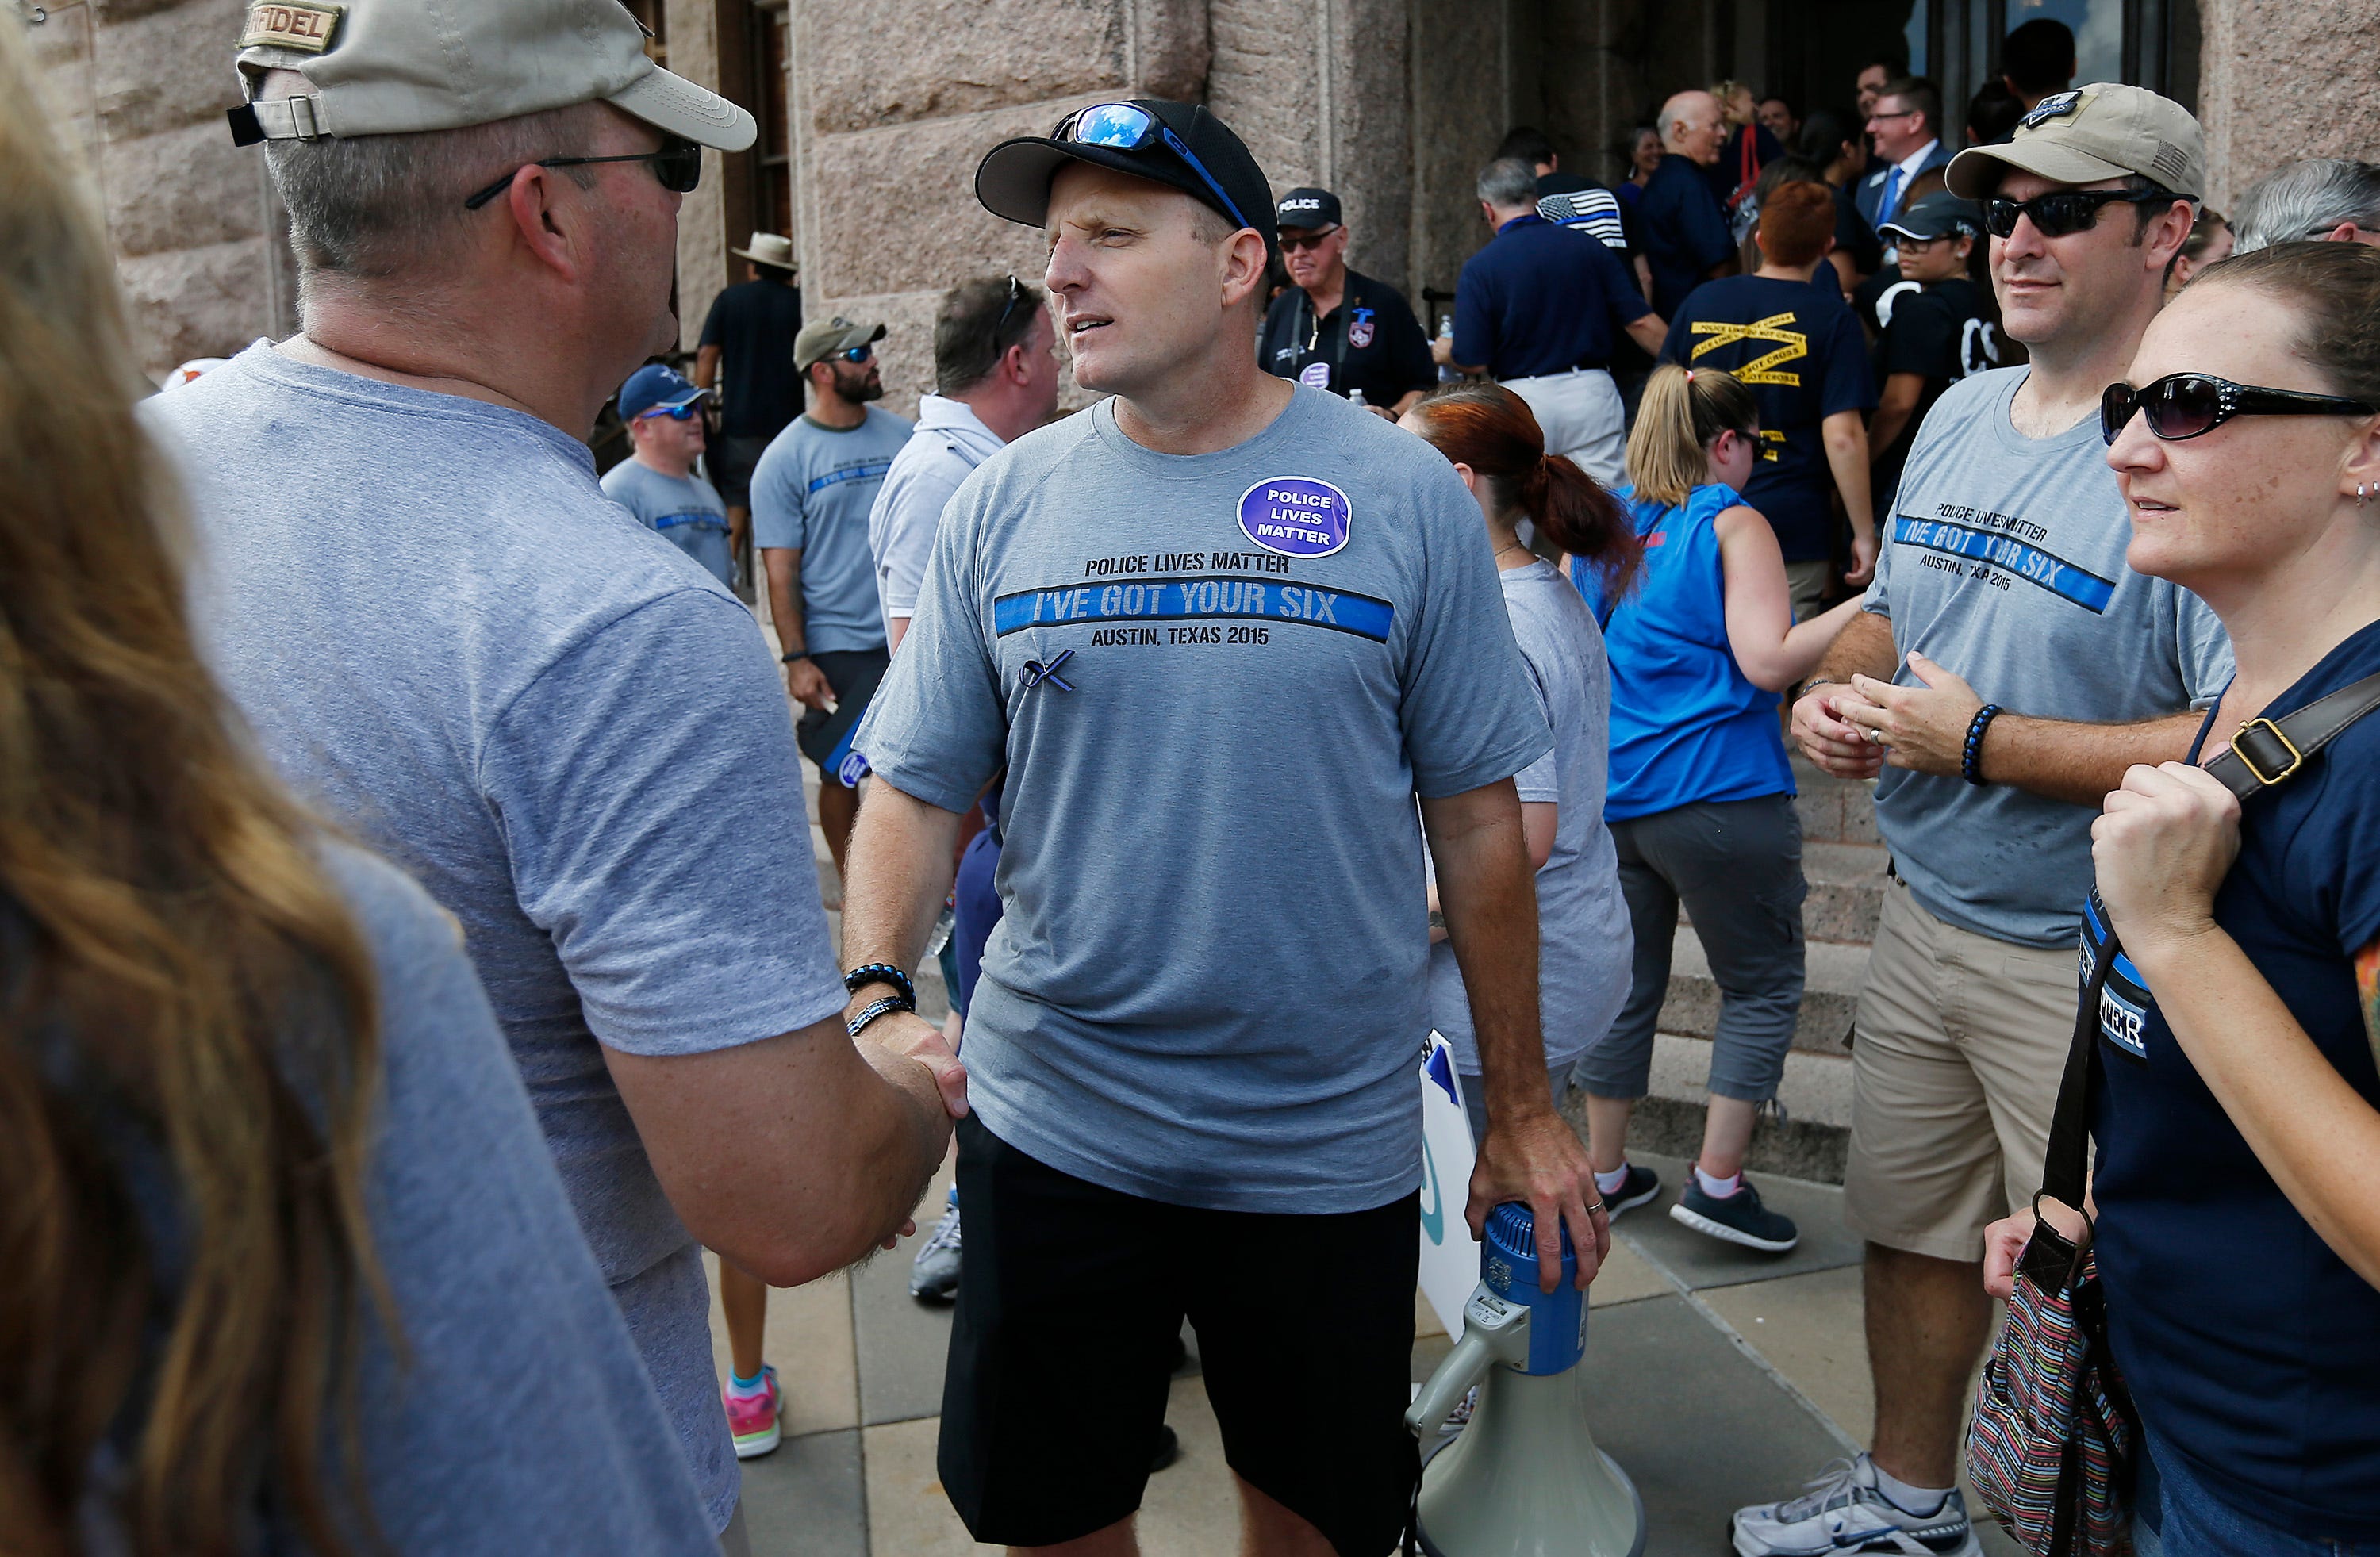 In Sept. 2015, Robert Chody organized a Police Lives Matter rally to oppose a Black Lives Matter march at the Texas Capitol on the same day.